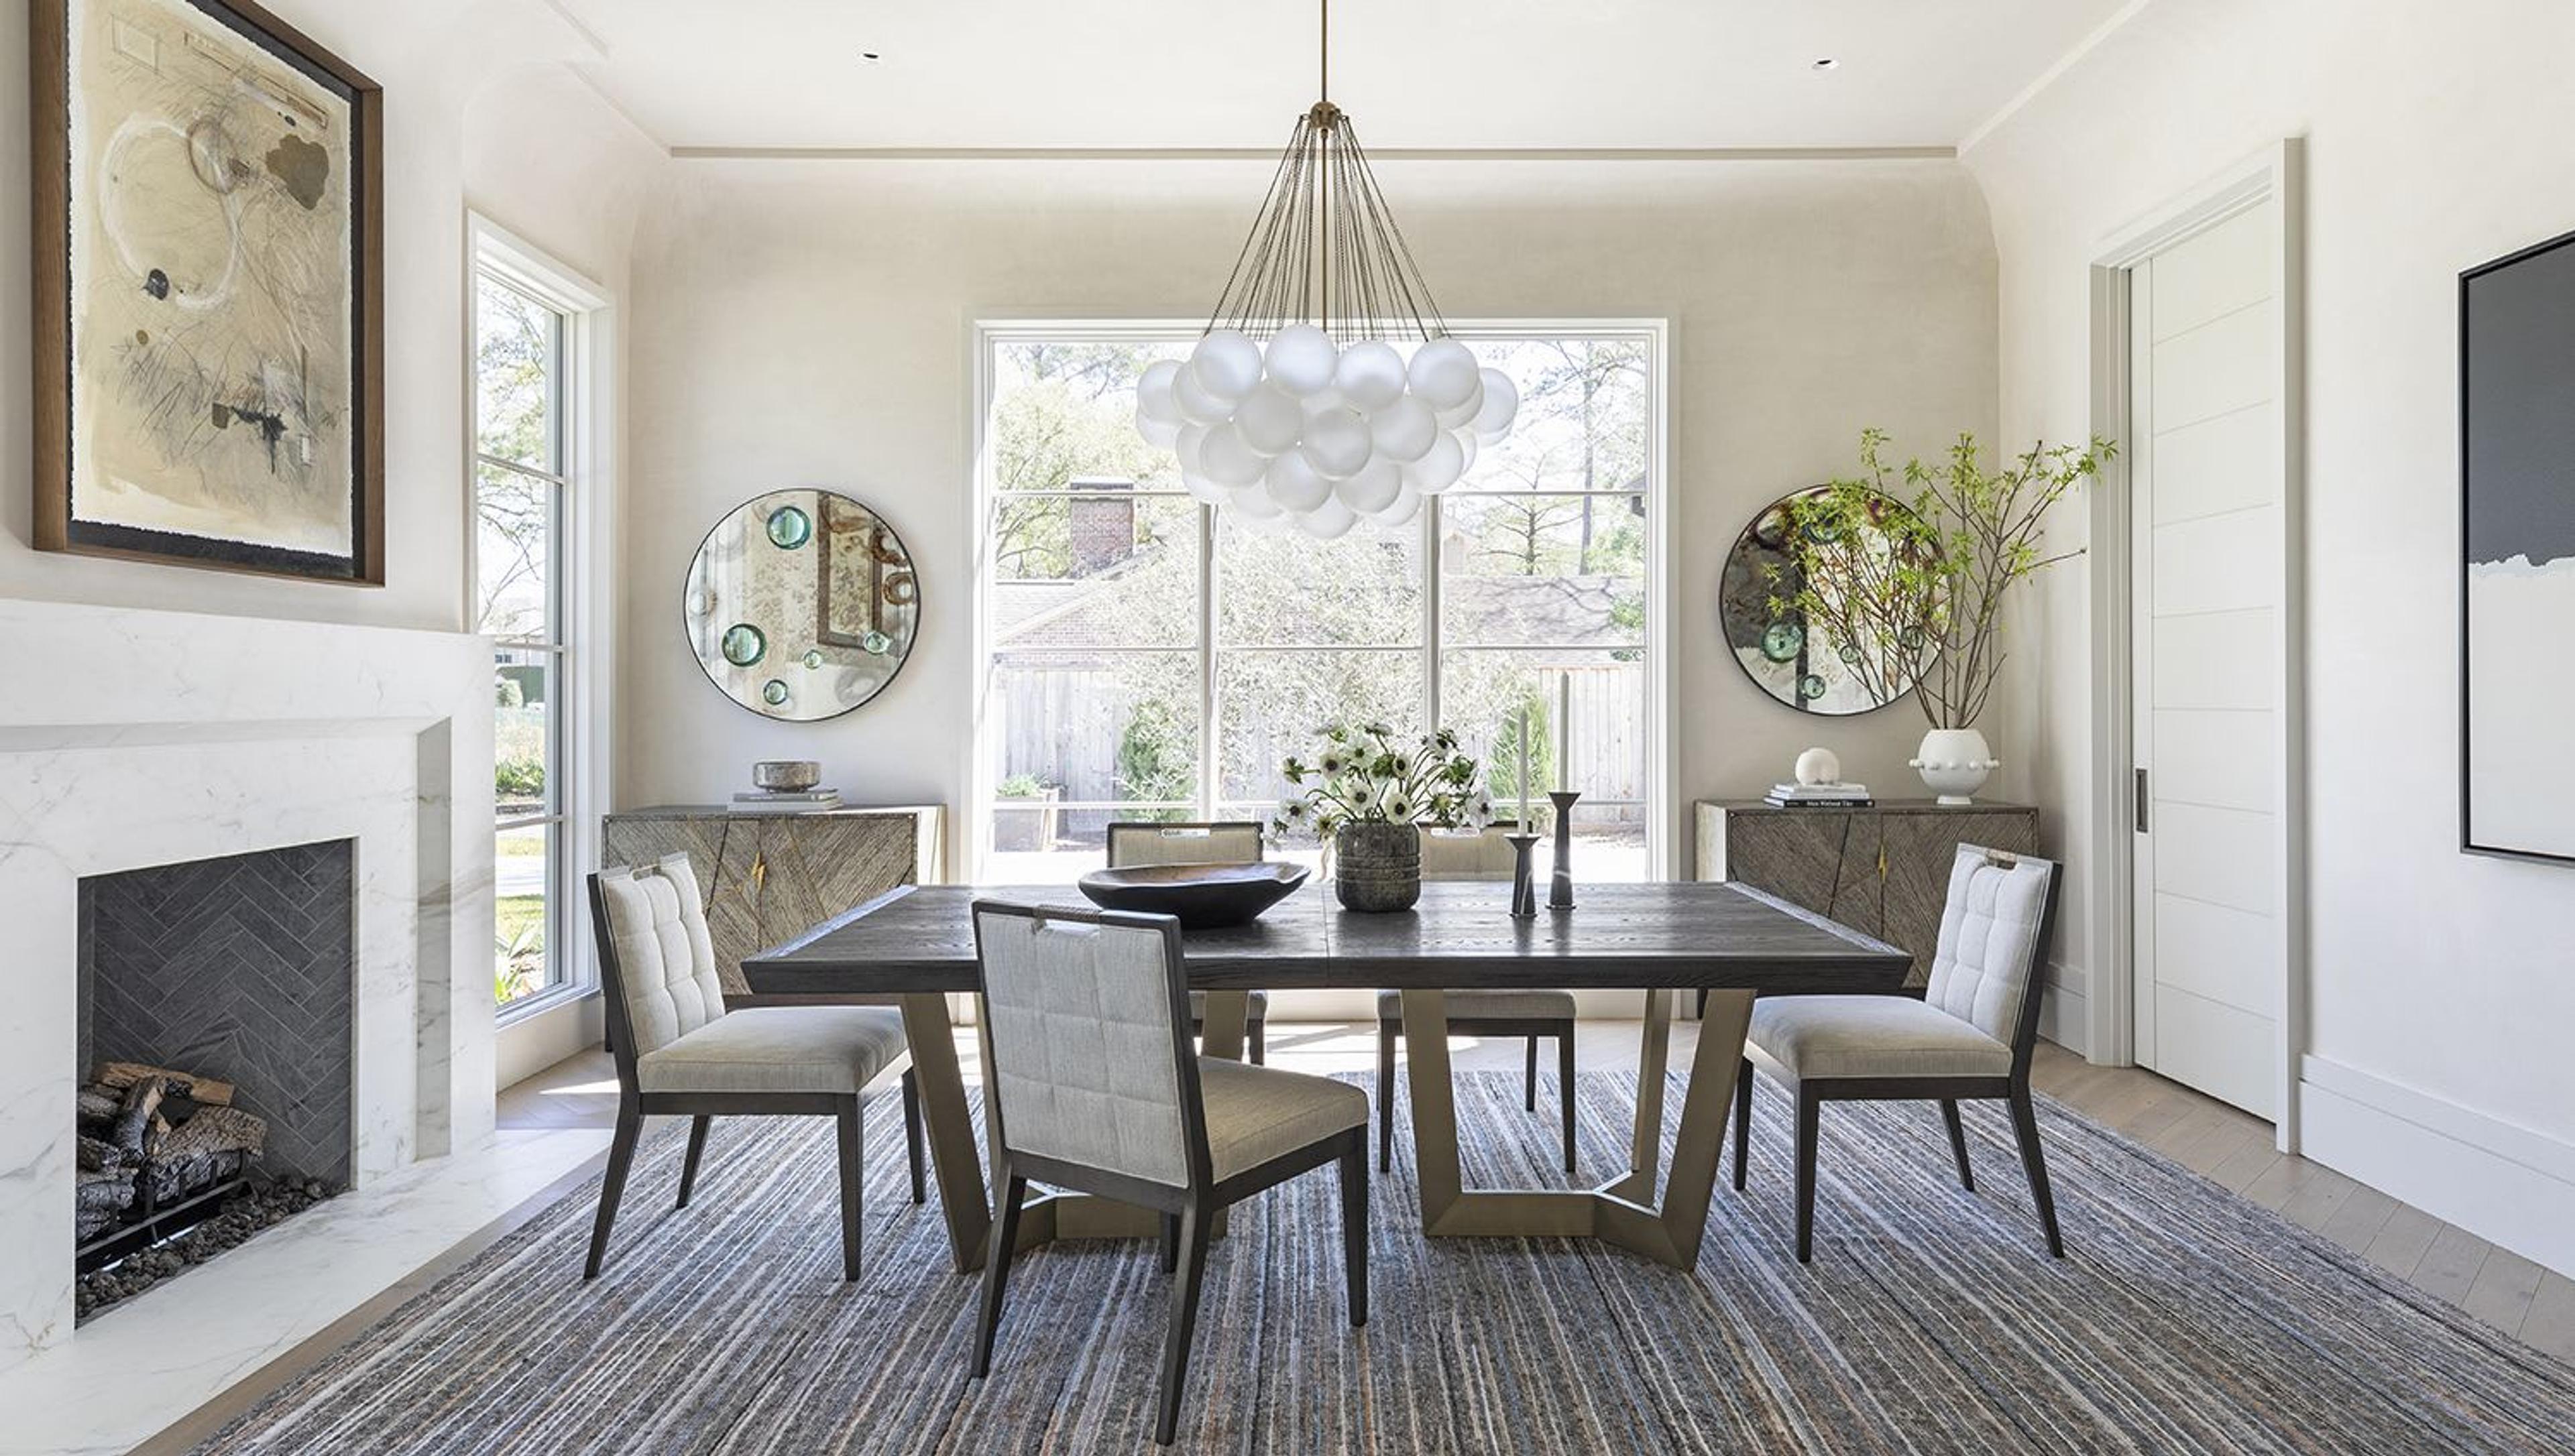 In this dining room, a cloud-like fixture of chain link and hand blown glass sets a soft, welcoming tone. Diamond plaster walls, a custom cove molding, and furnishings with unique, unexpected forms infuse drama by playing with balance and composition.